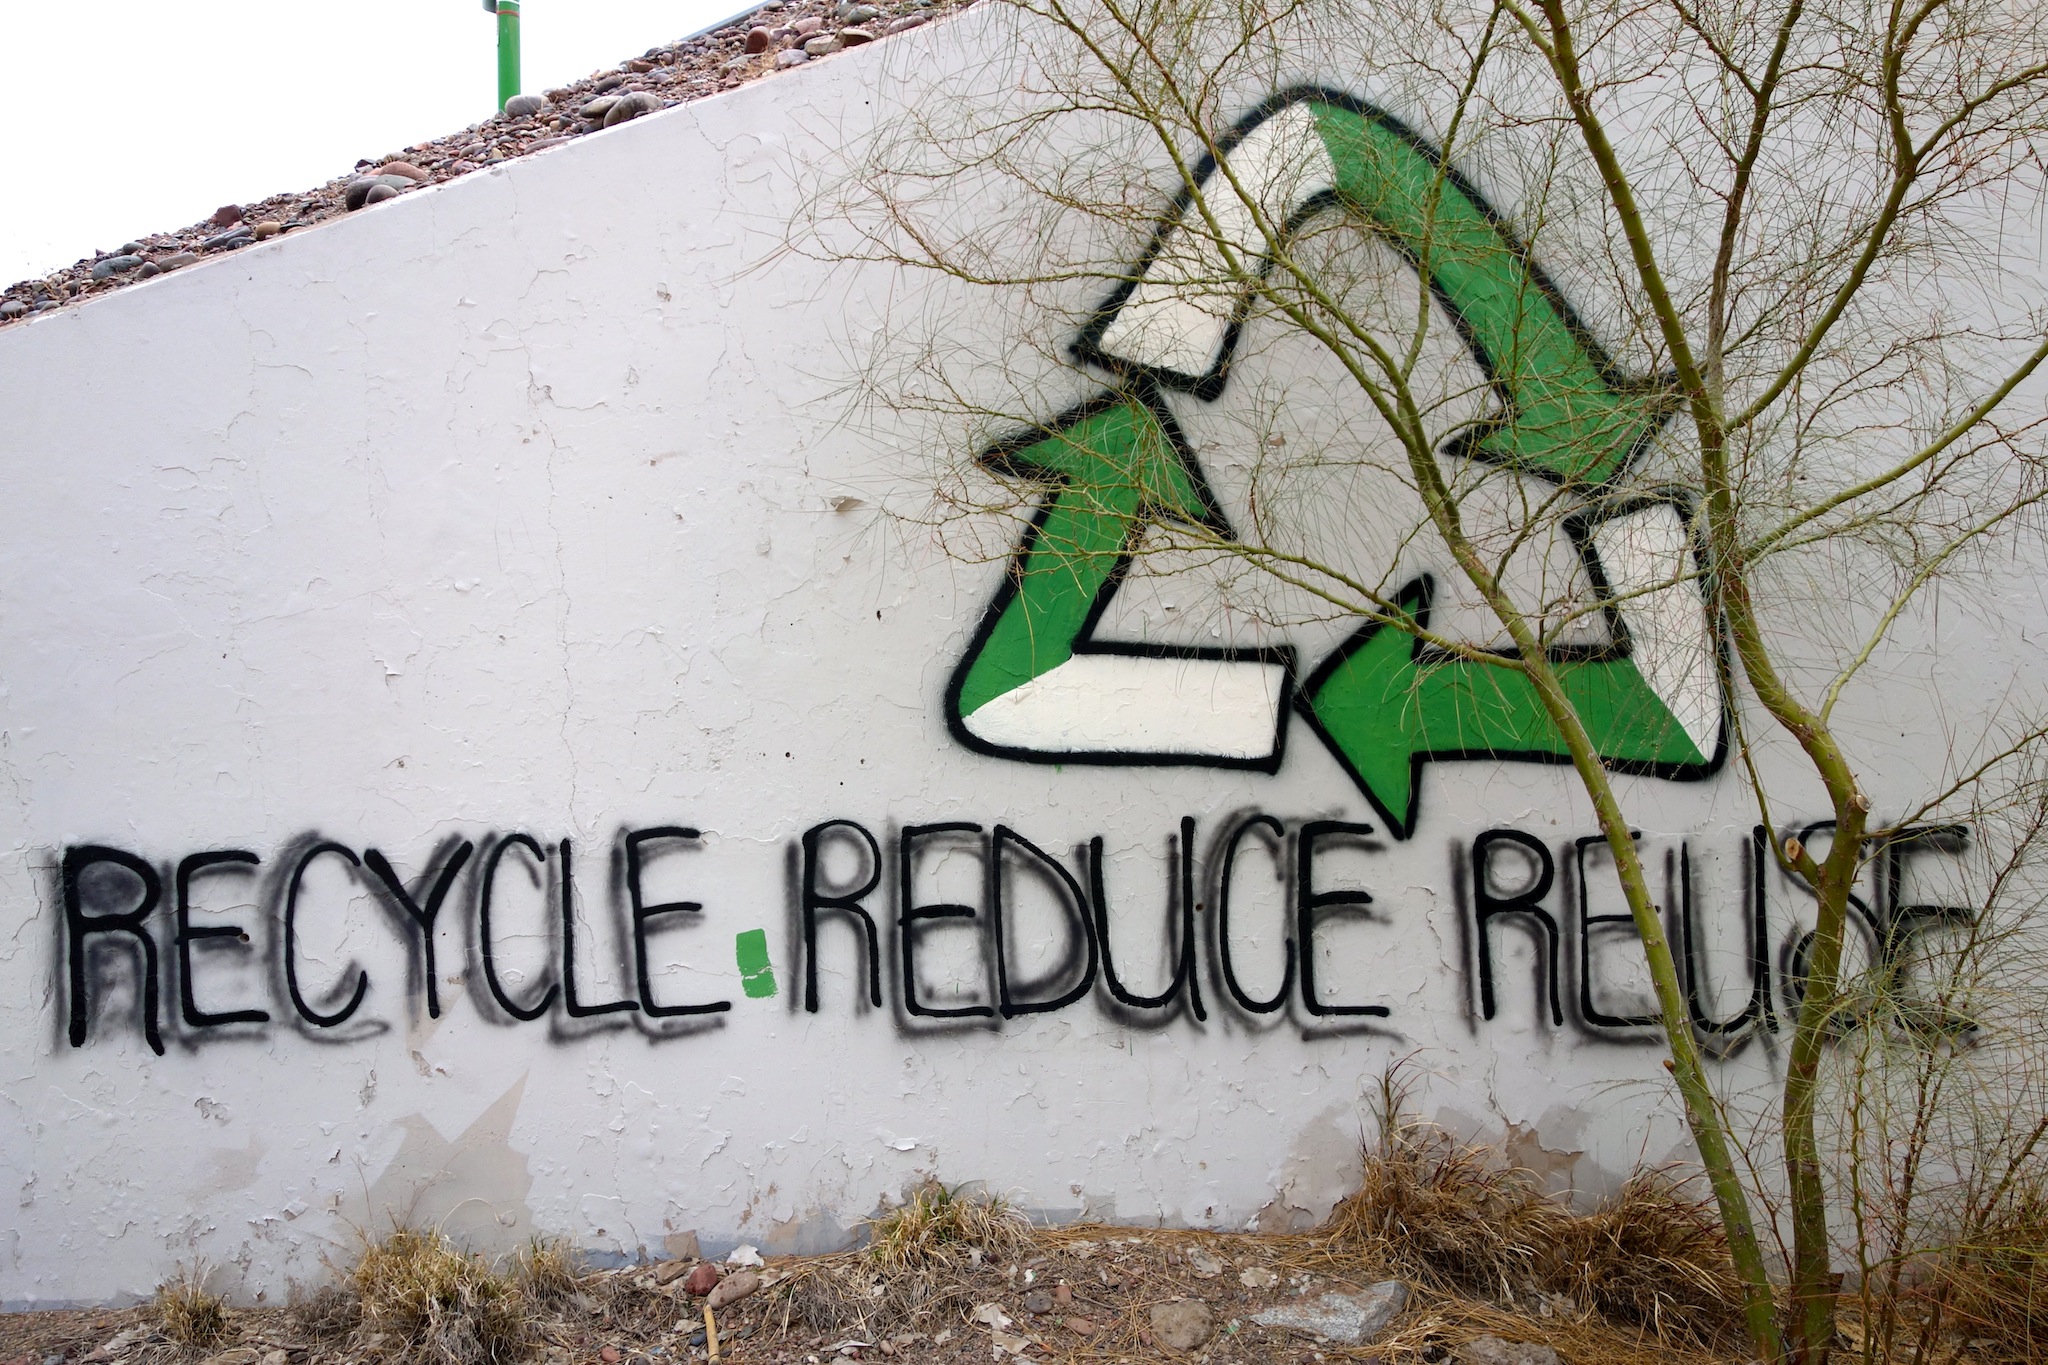 Recycle-Reduce-Reuse